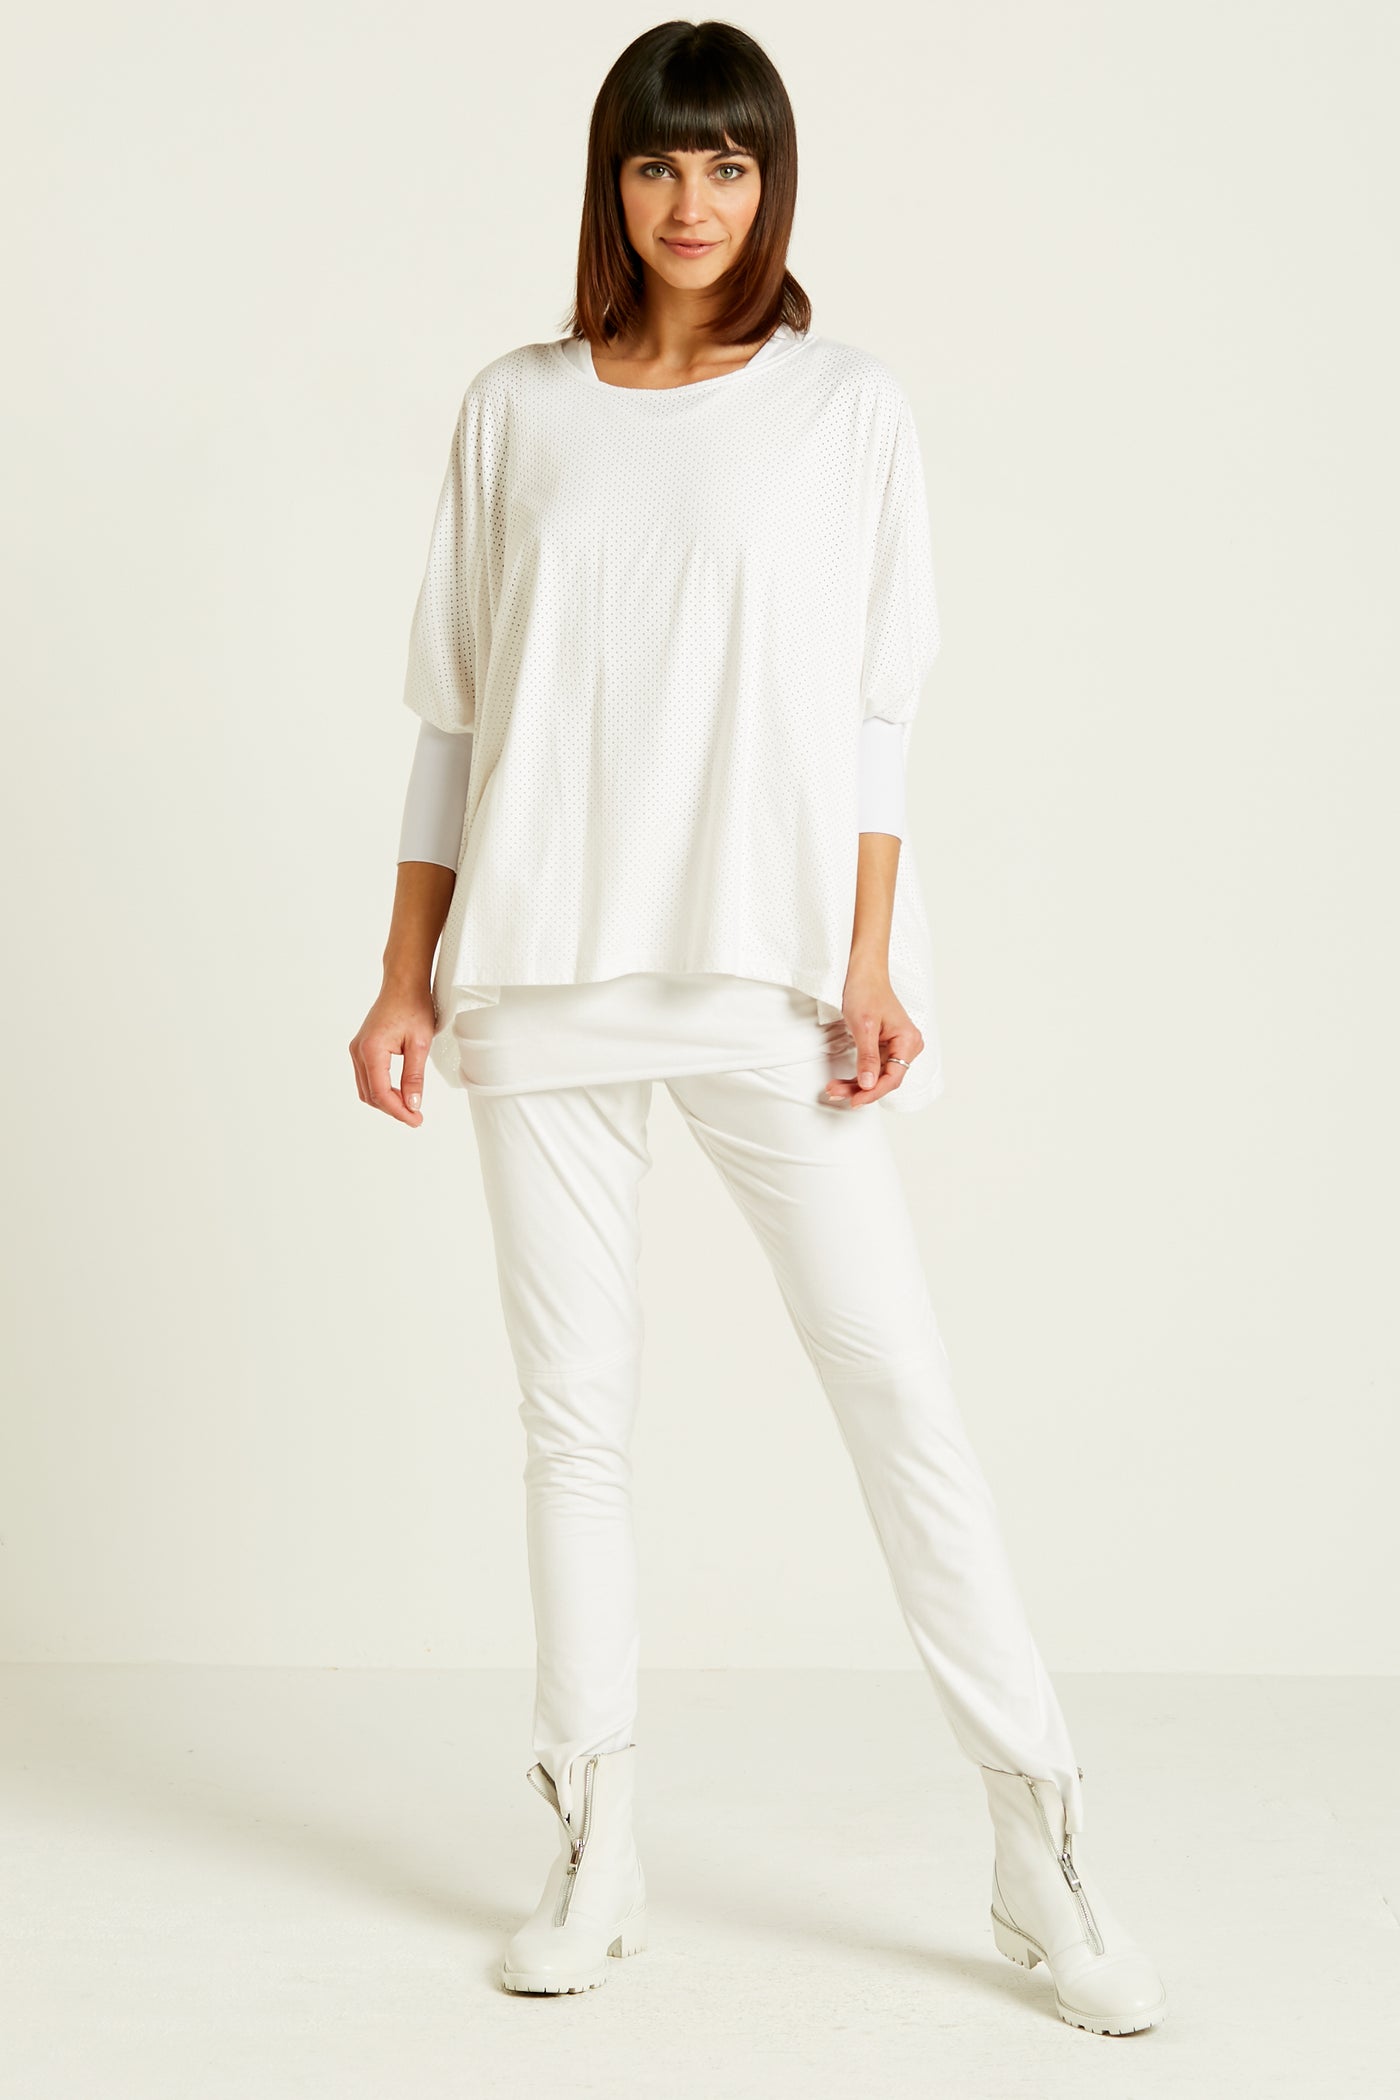 Perforated Suede Slouchy Top